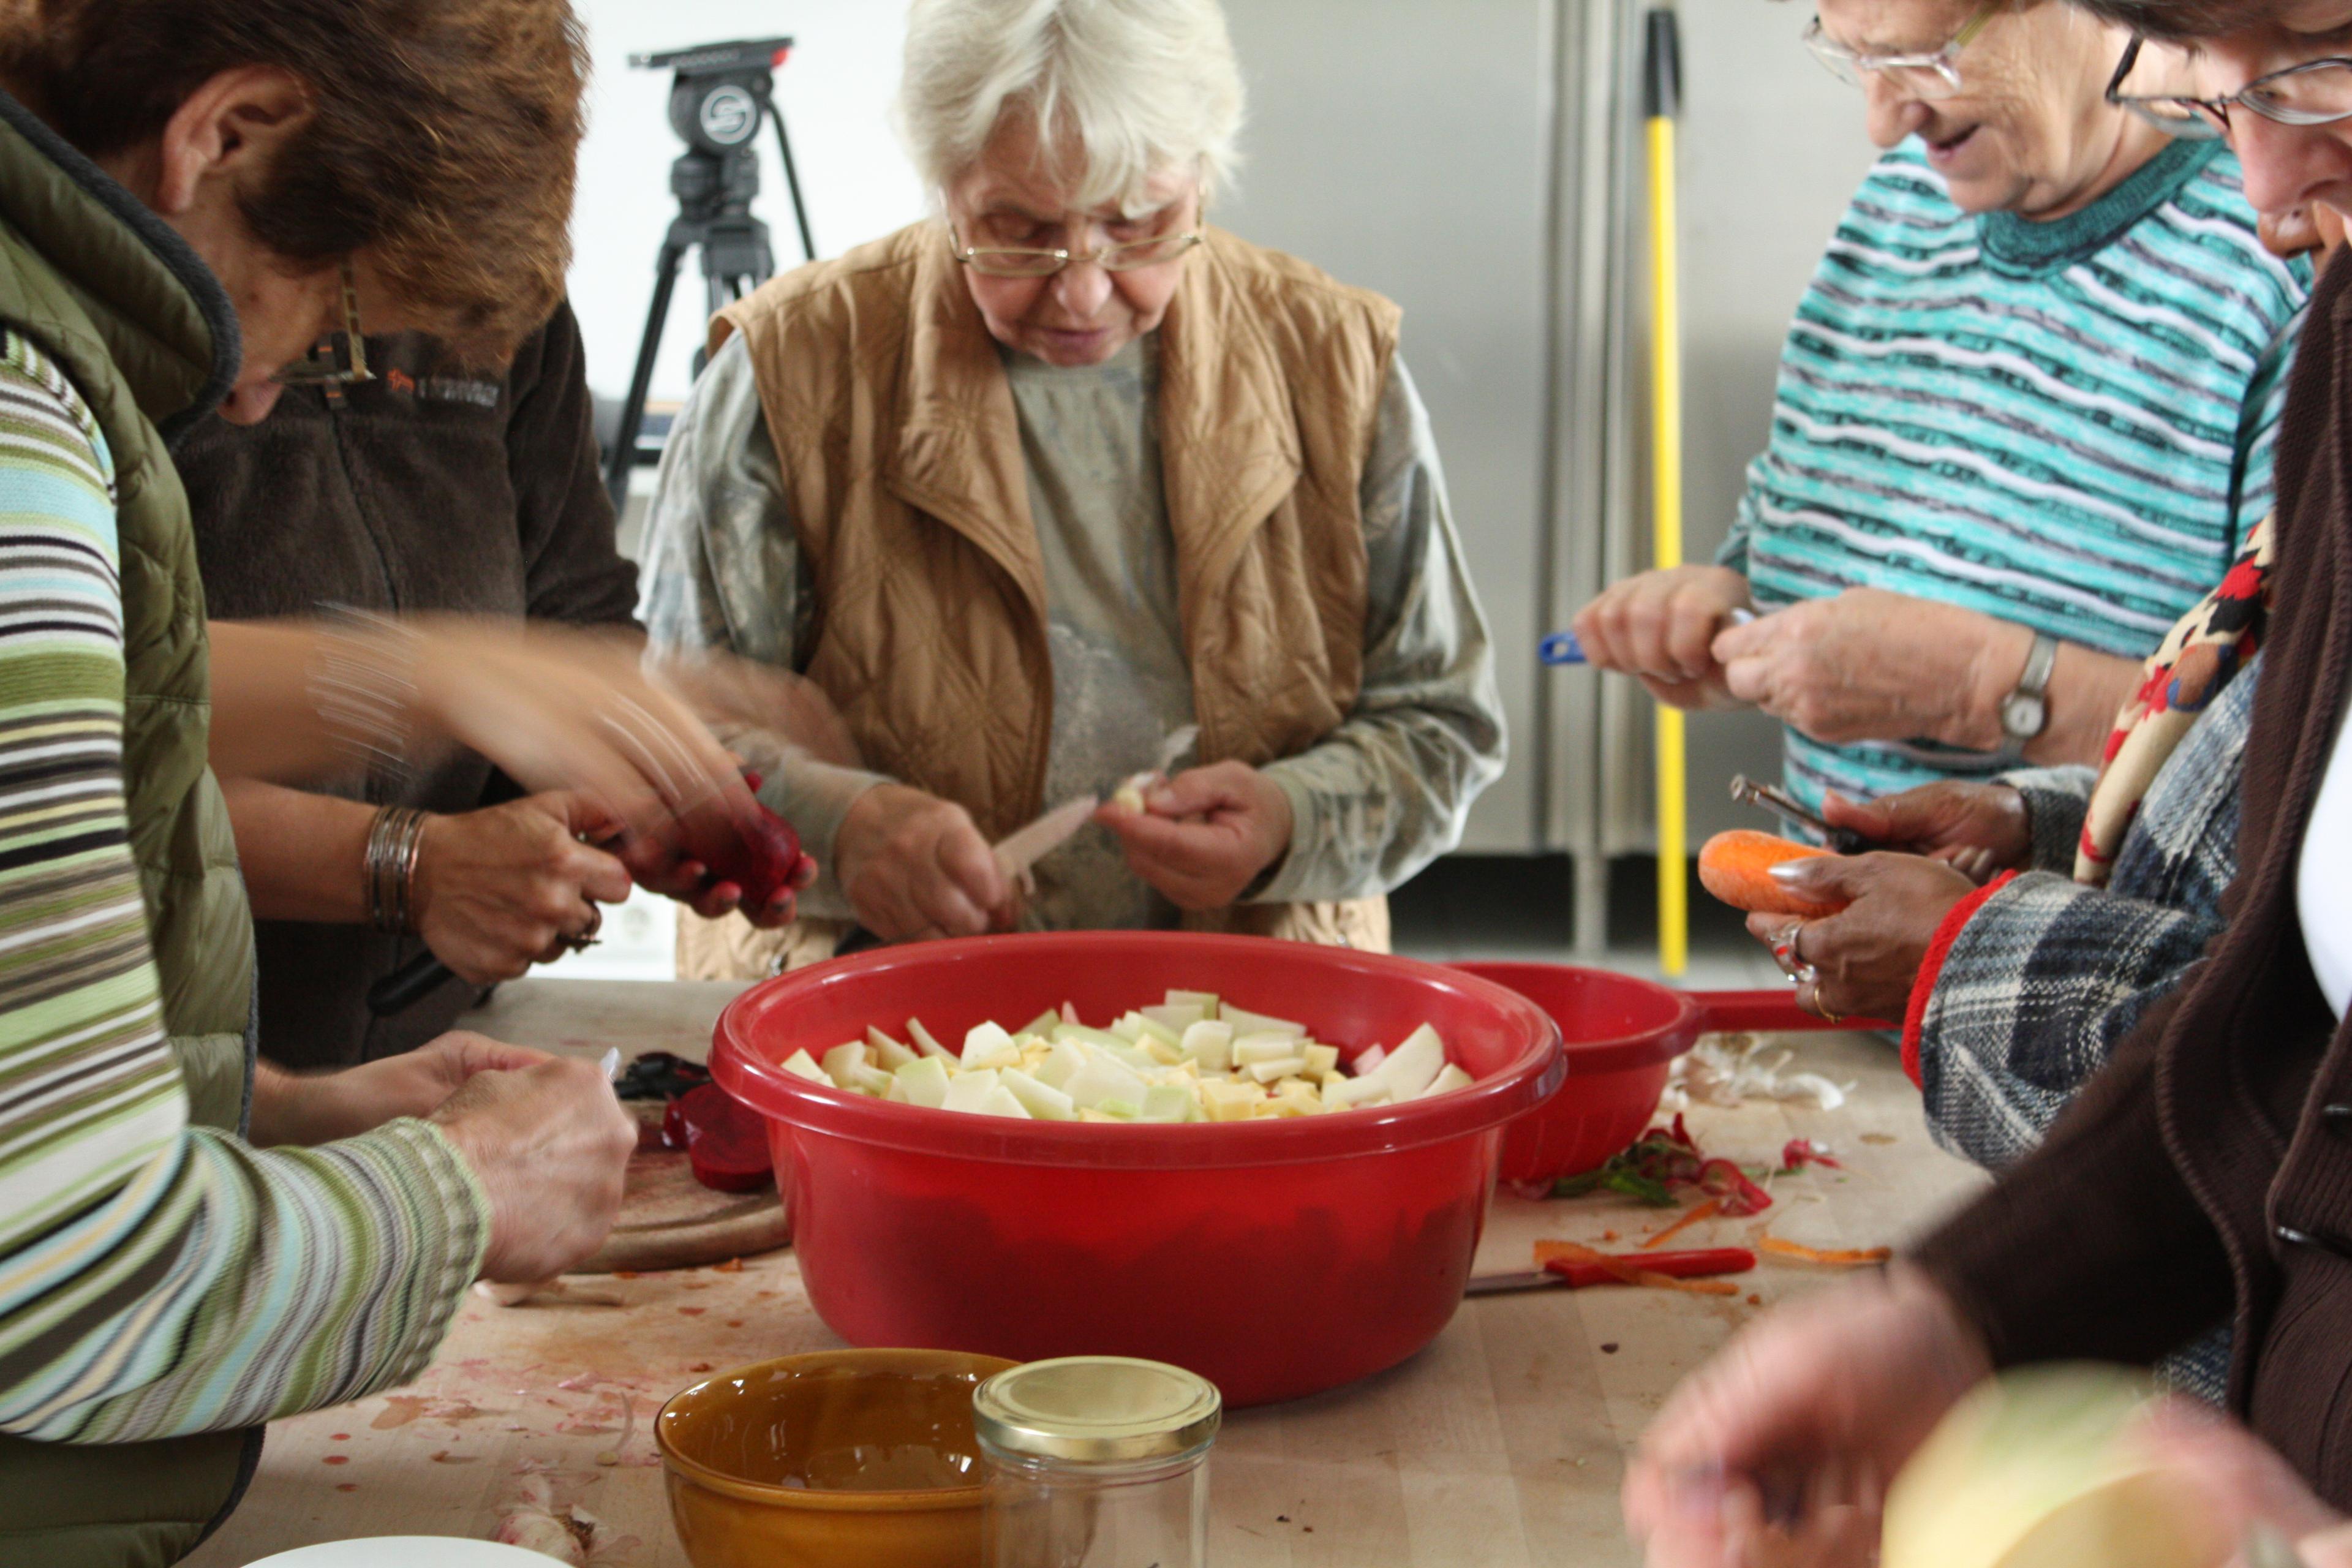 A group of women are places around a big red bowl on a wooden table. They all peel and chop vegetables.